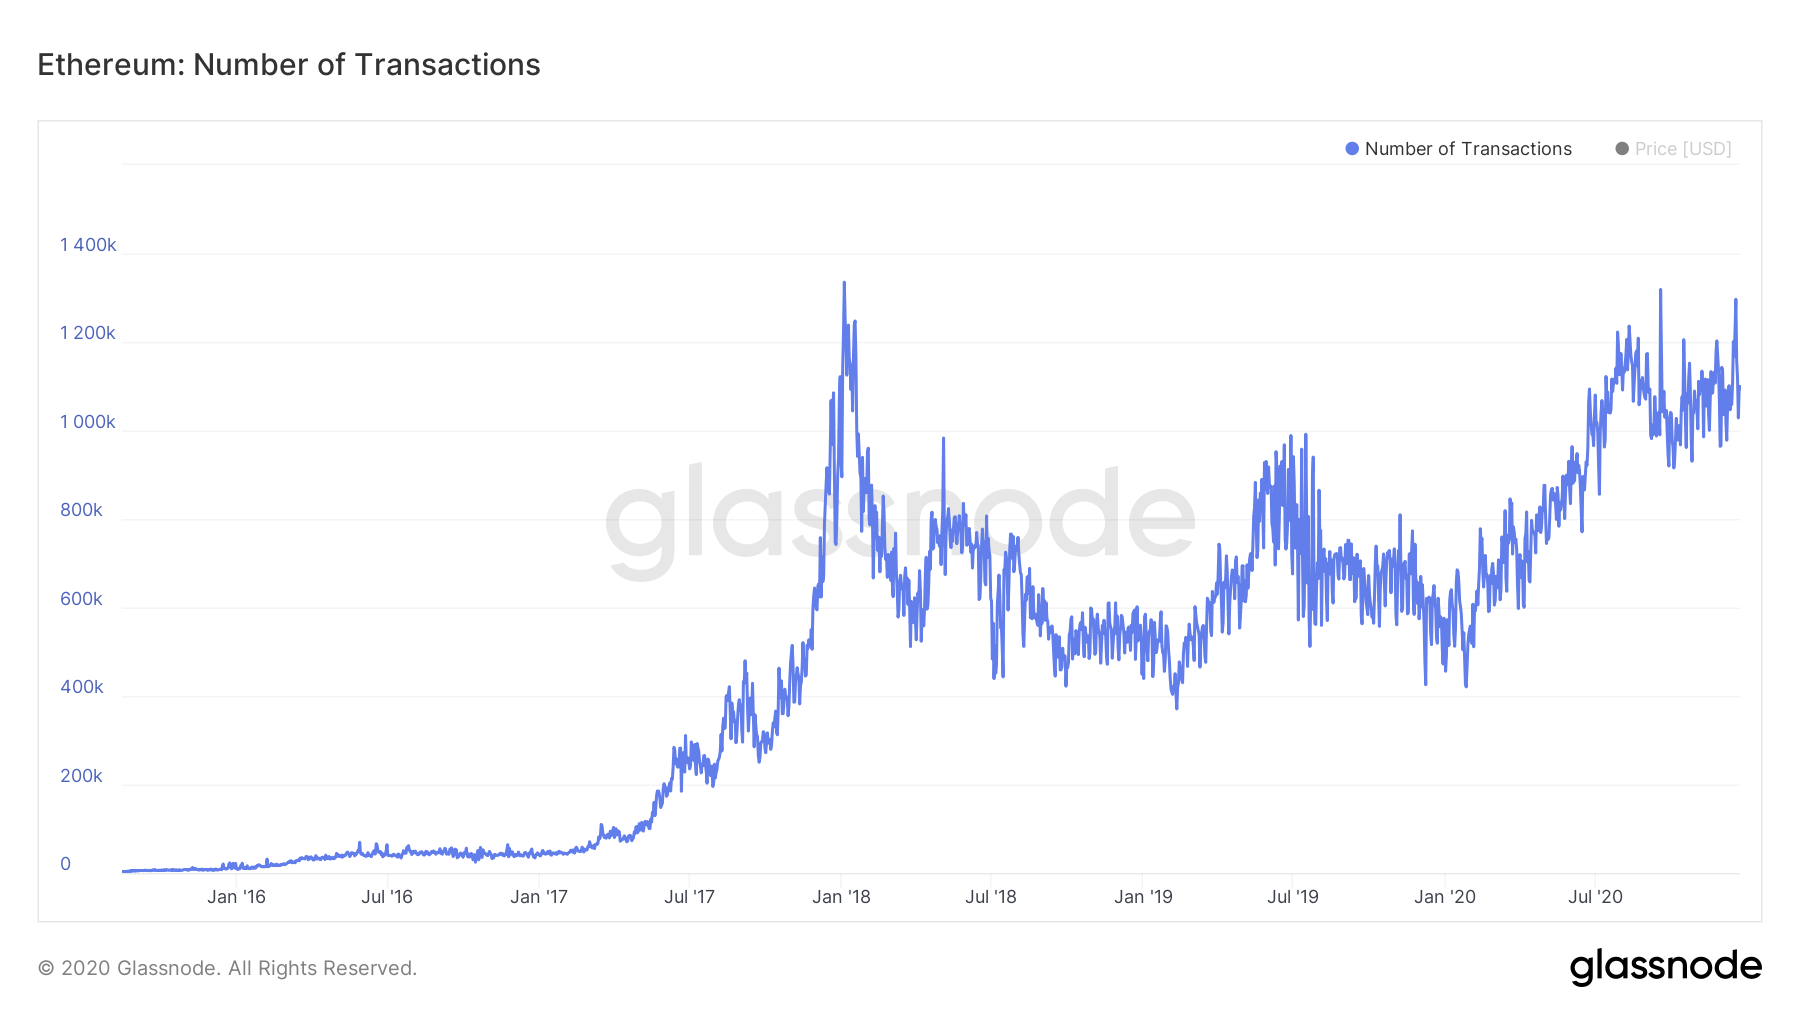 Ethereum Price History Chart - All ETH Historical Data